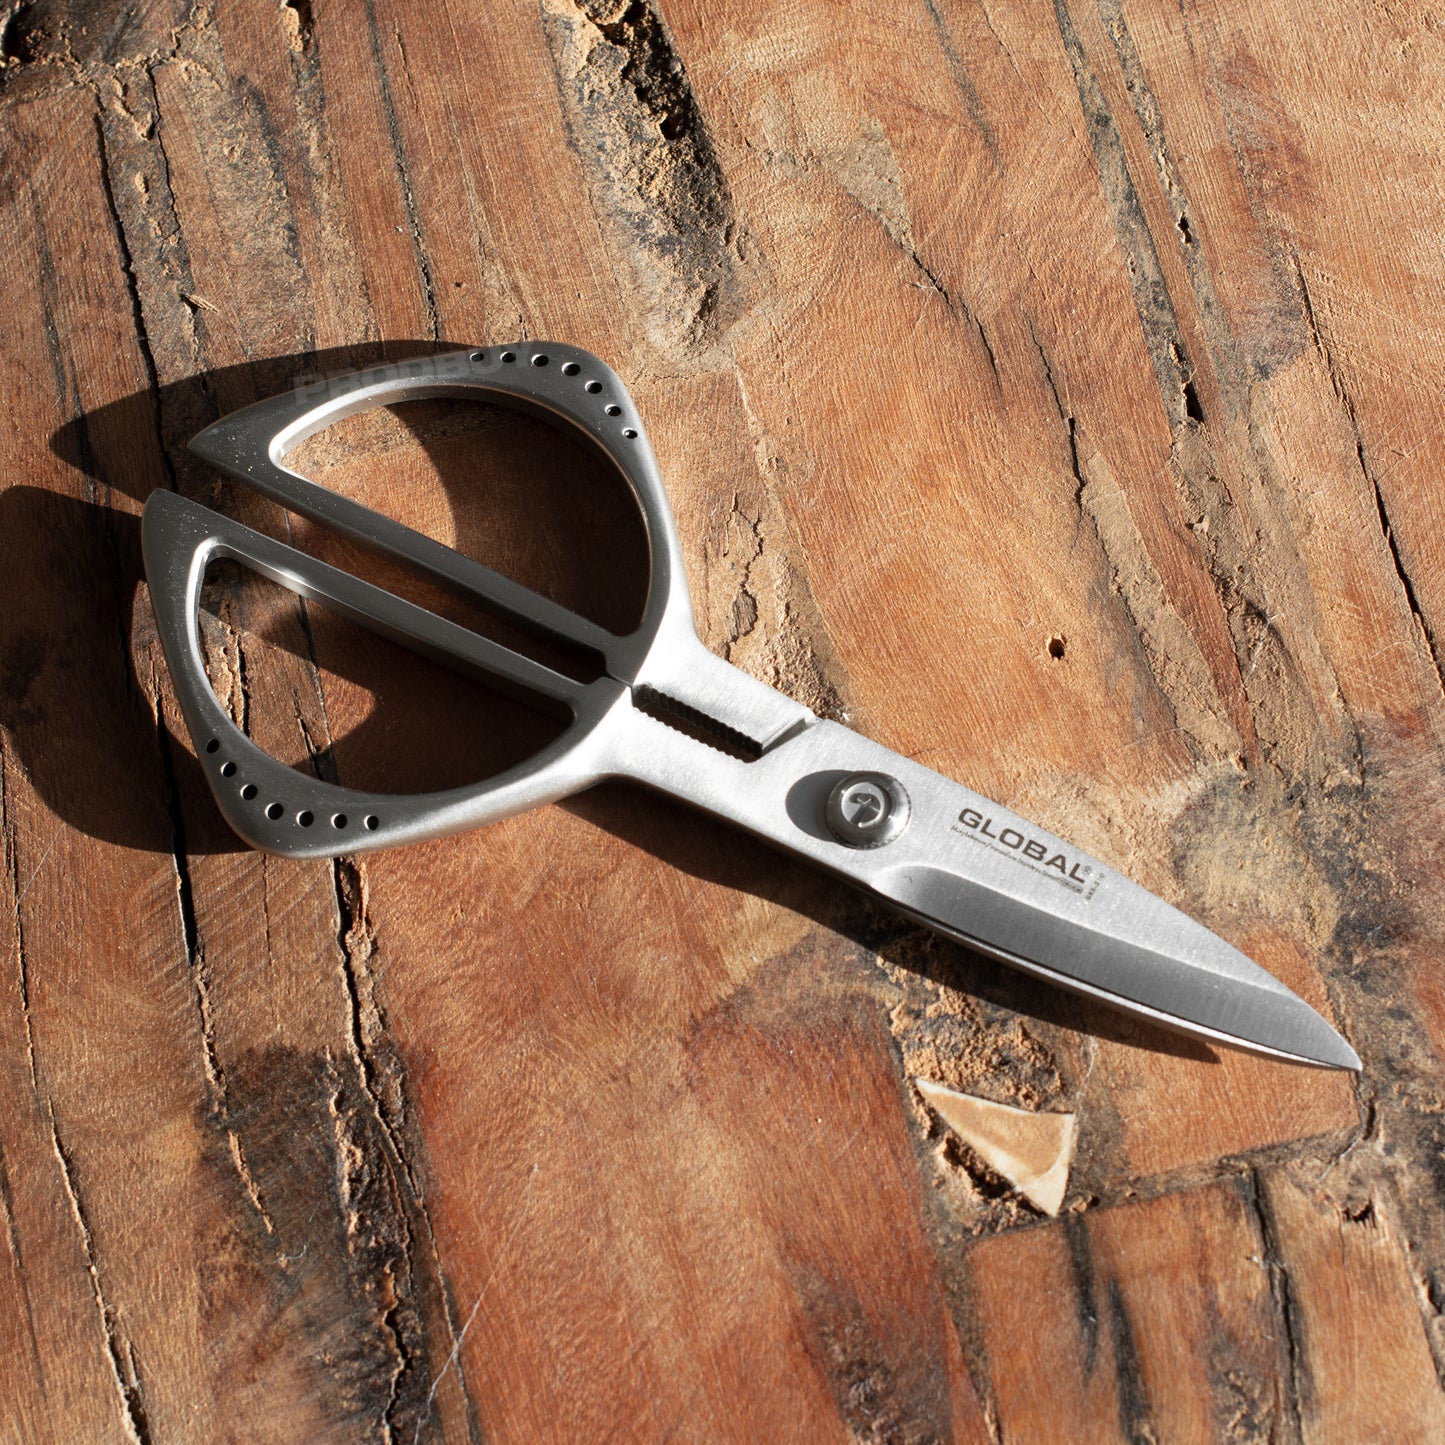 Global Stainless Steel Kitchen Shears